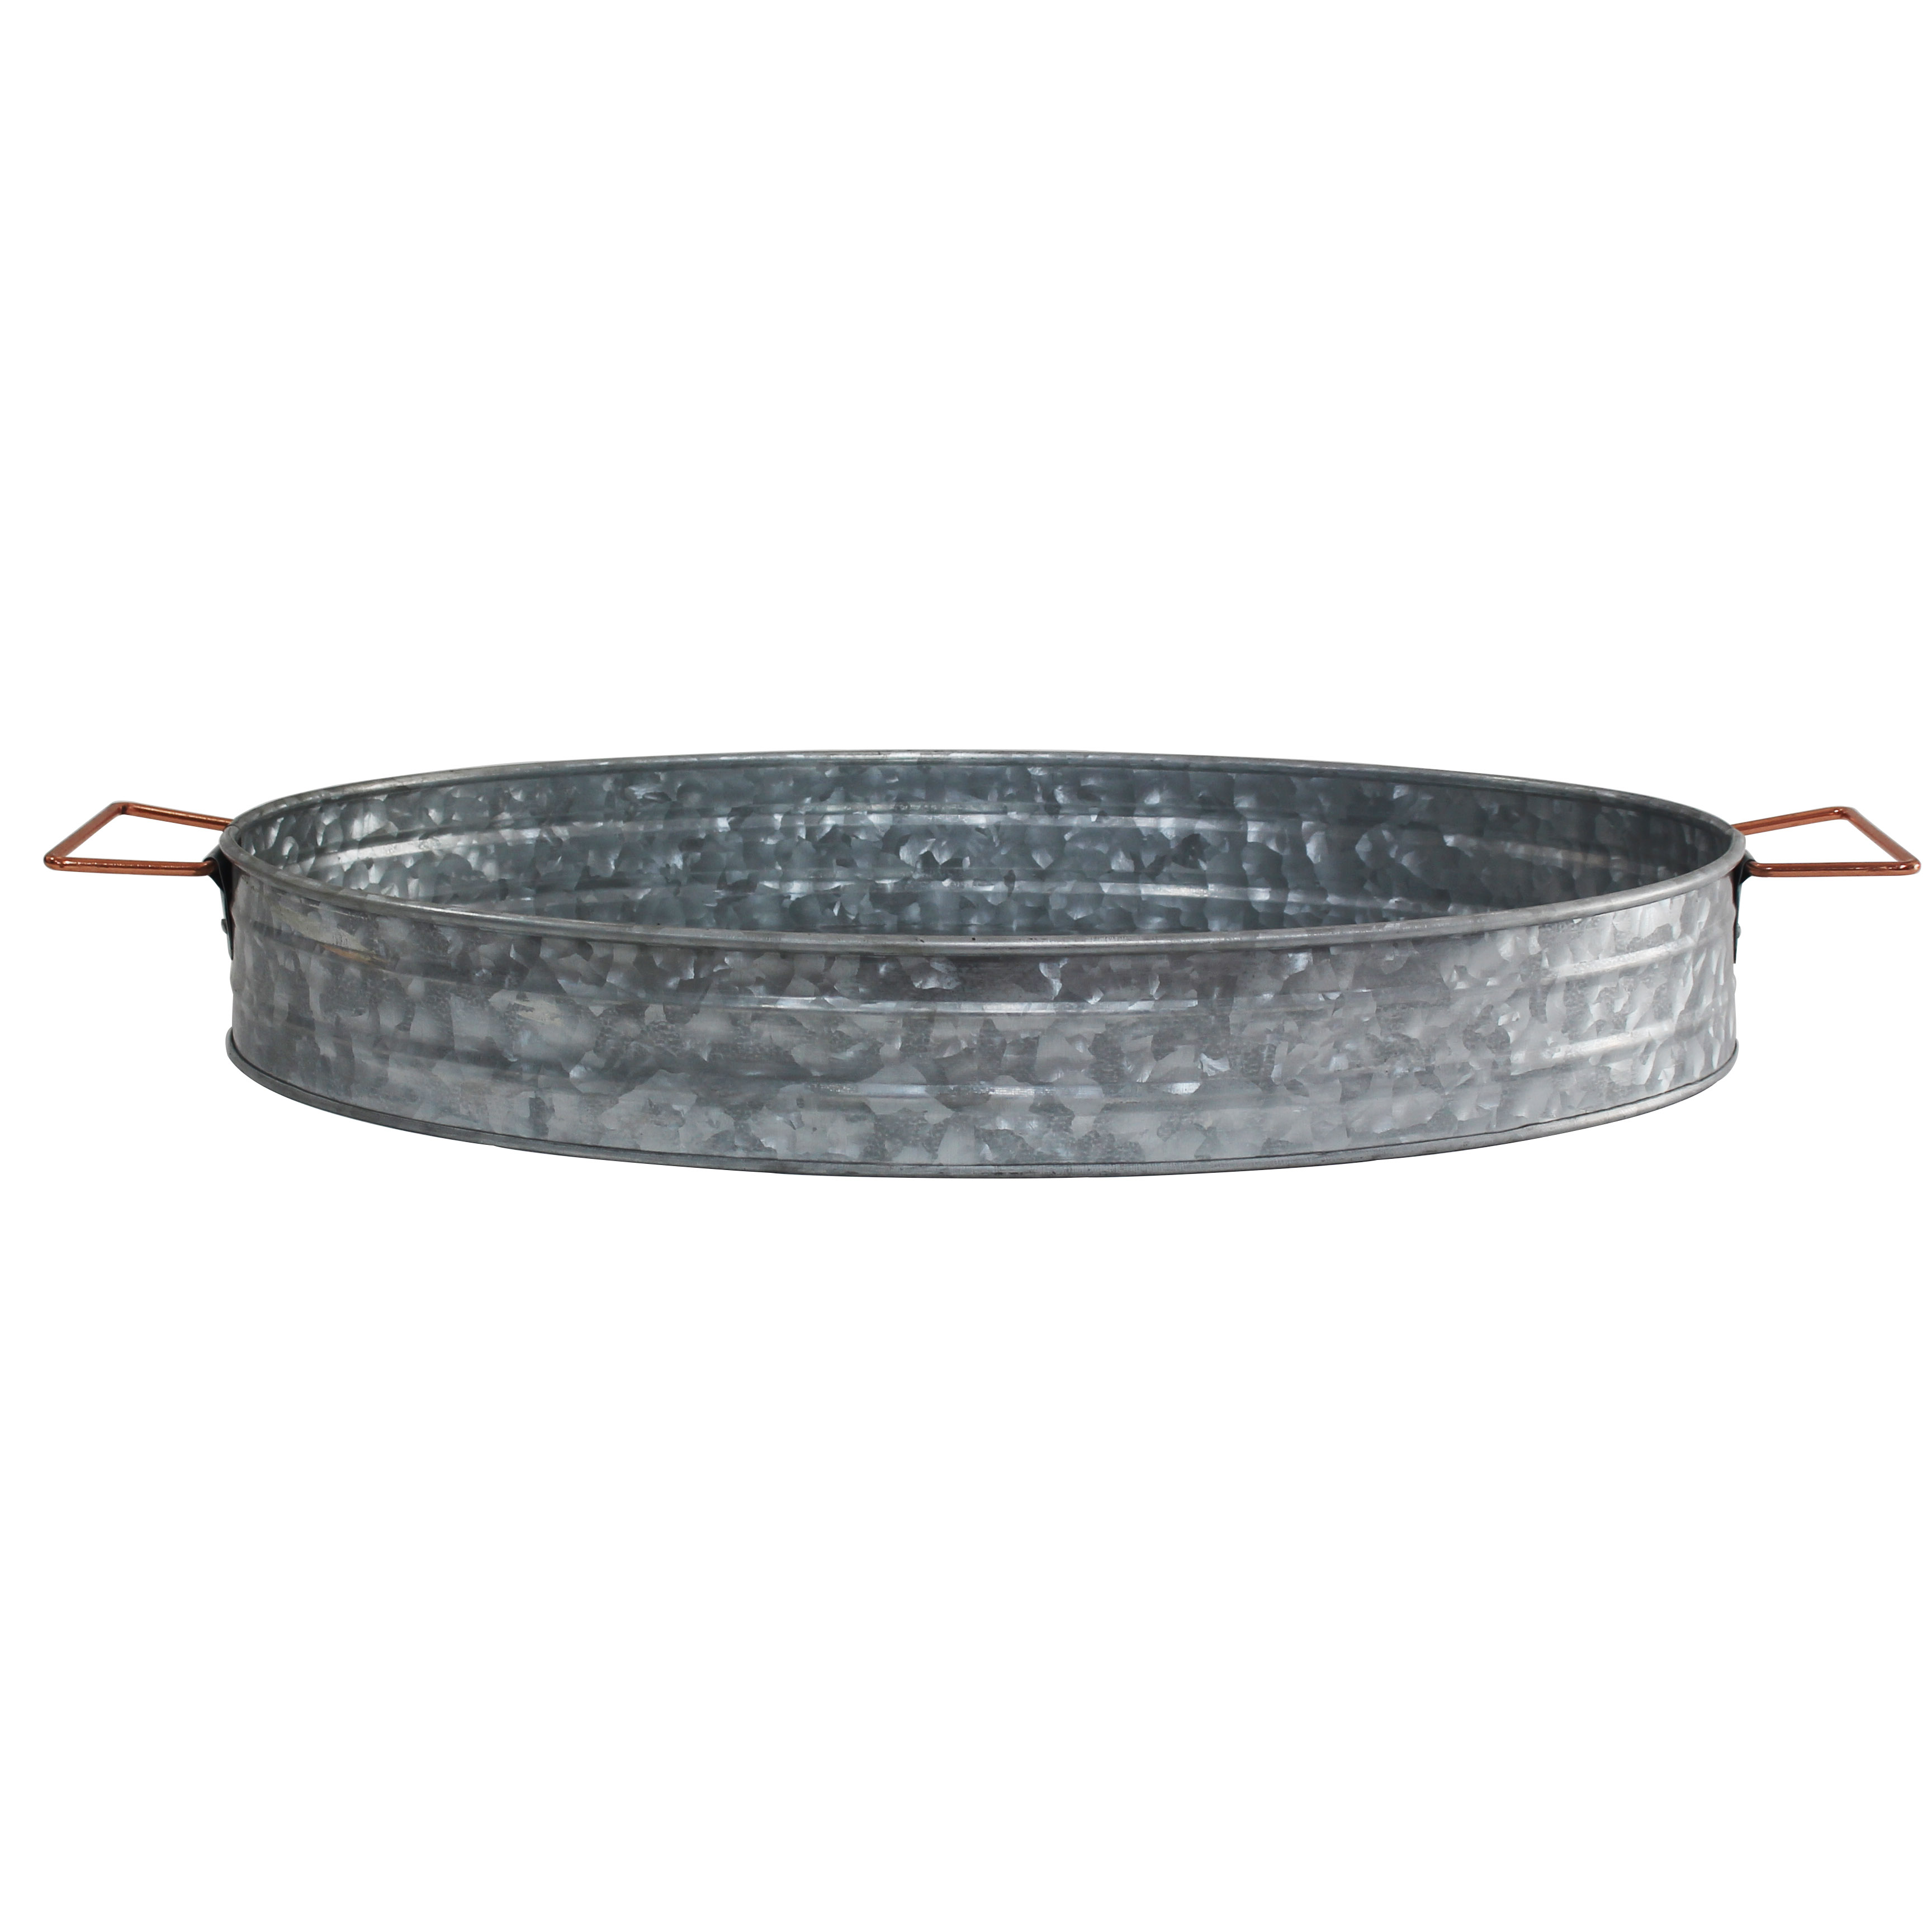 Round Galvanized Metal Serving Tray with Metal Handles